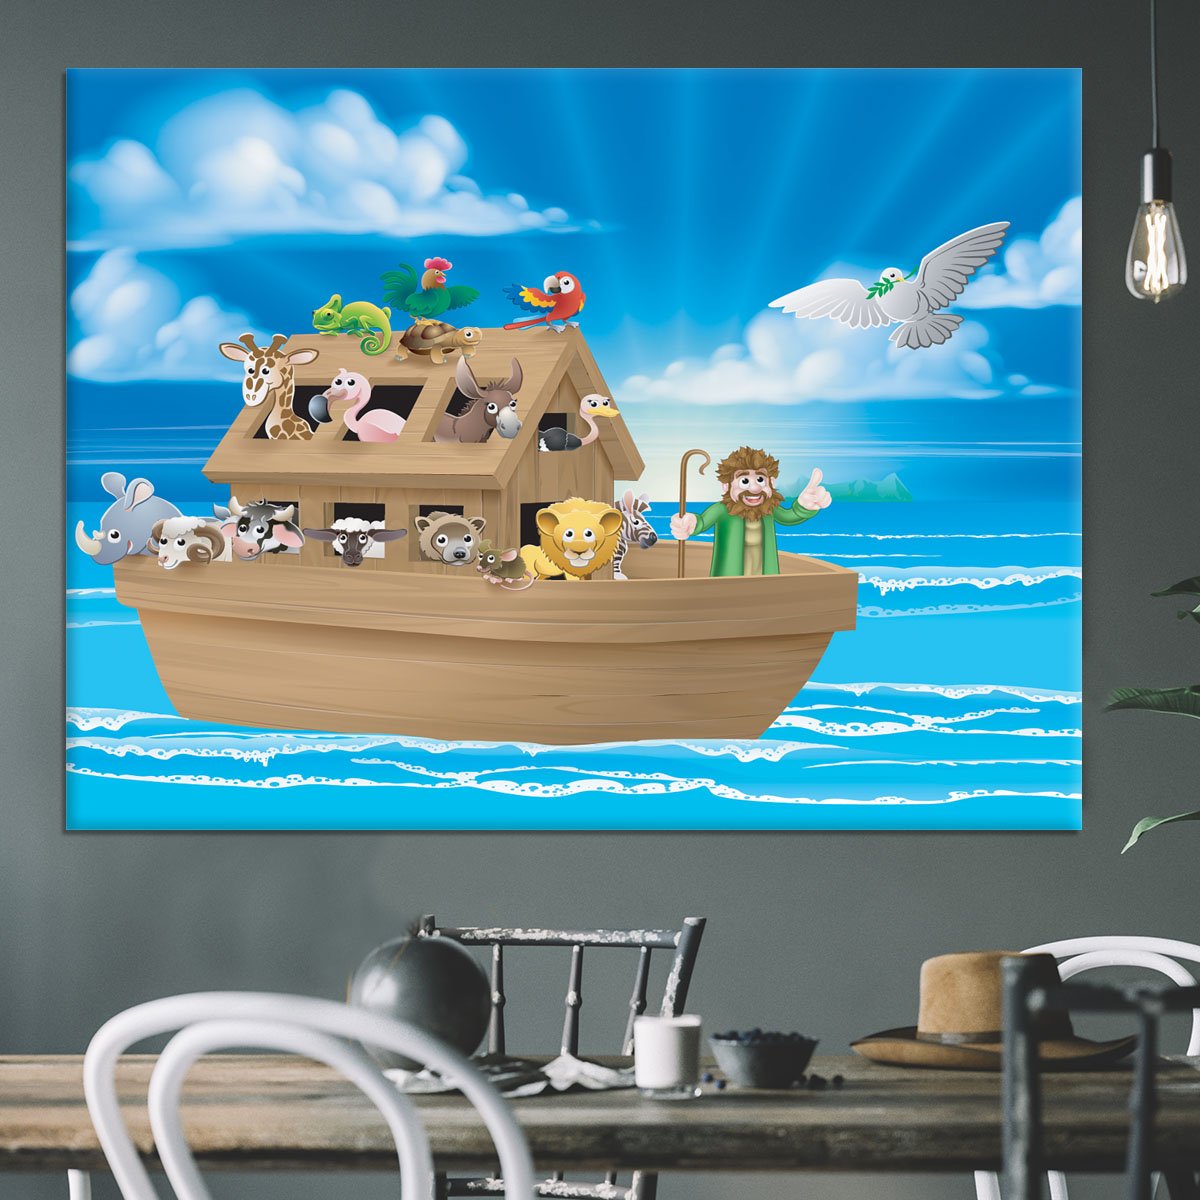 Cartoon childrens illustration of the Christian Bible story of Noah Canvas Print or Poster